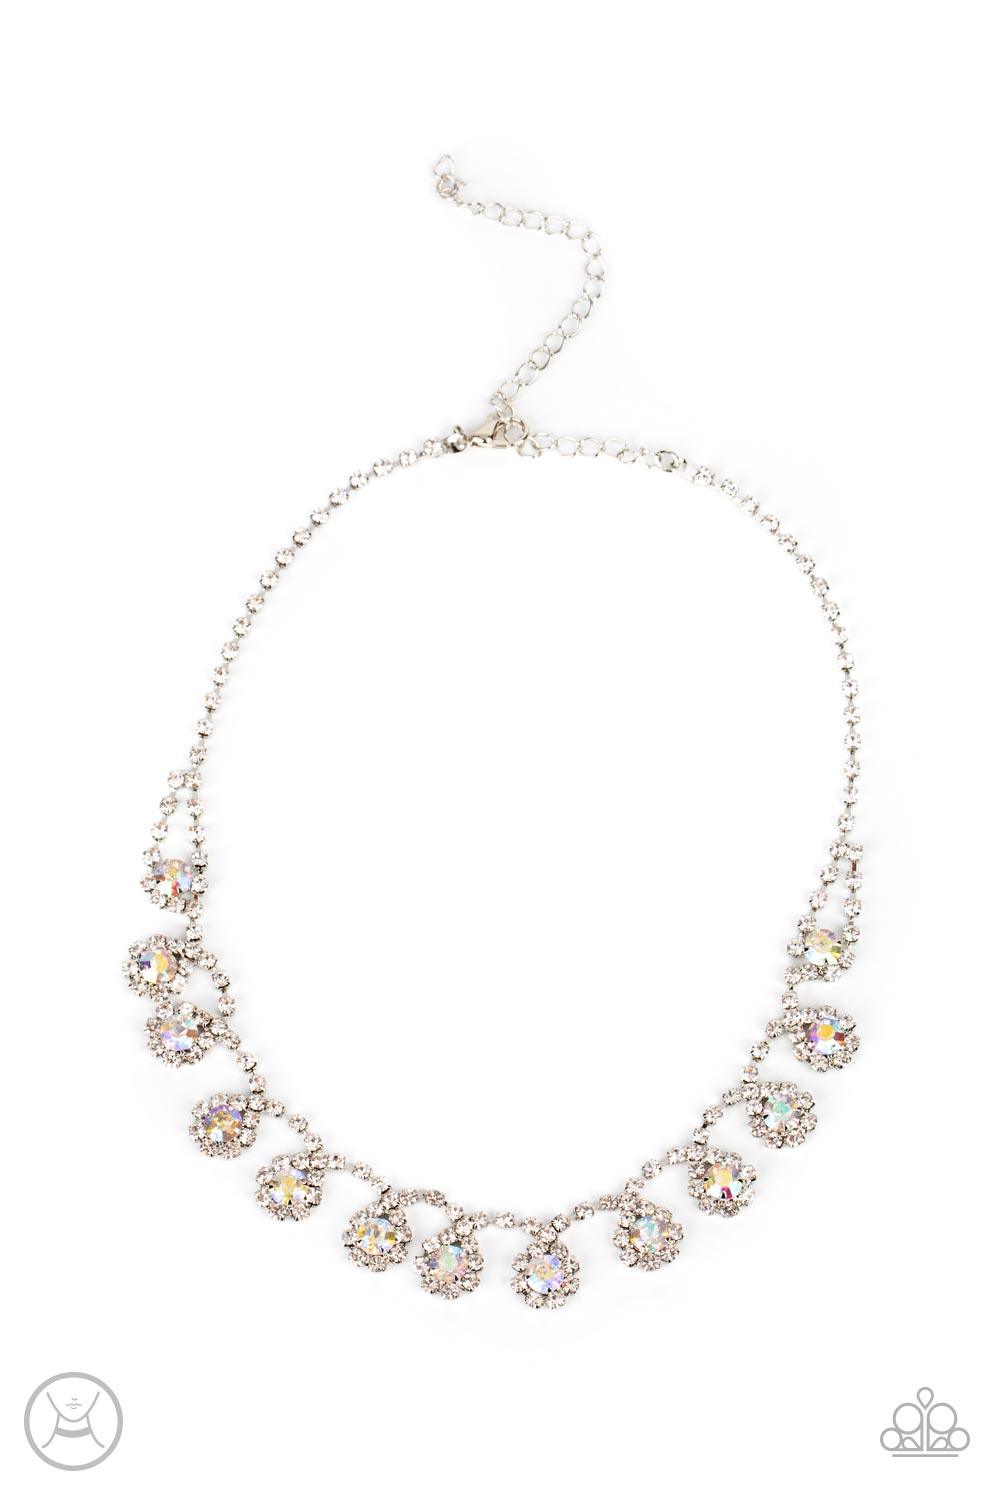 Paparazzi Accessories Princess Prominence - Multi A dainty strand of glittery white rhinestones encircle solitaire iridescent rhinestones around the neck, creating a glitzy fringe. Features an adjustable clasp closure. Sold as one individual choker neckla